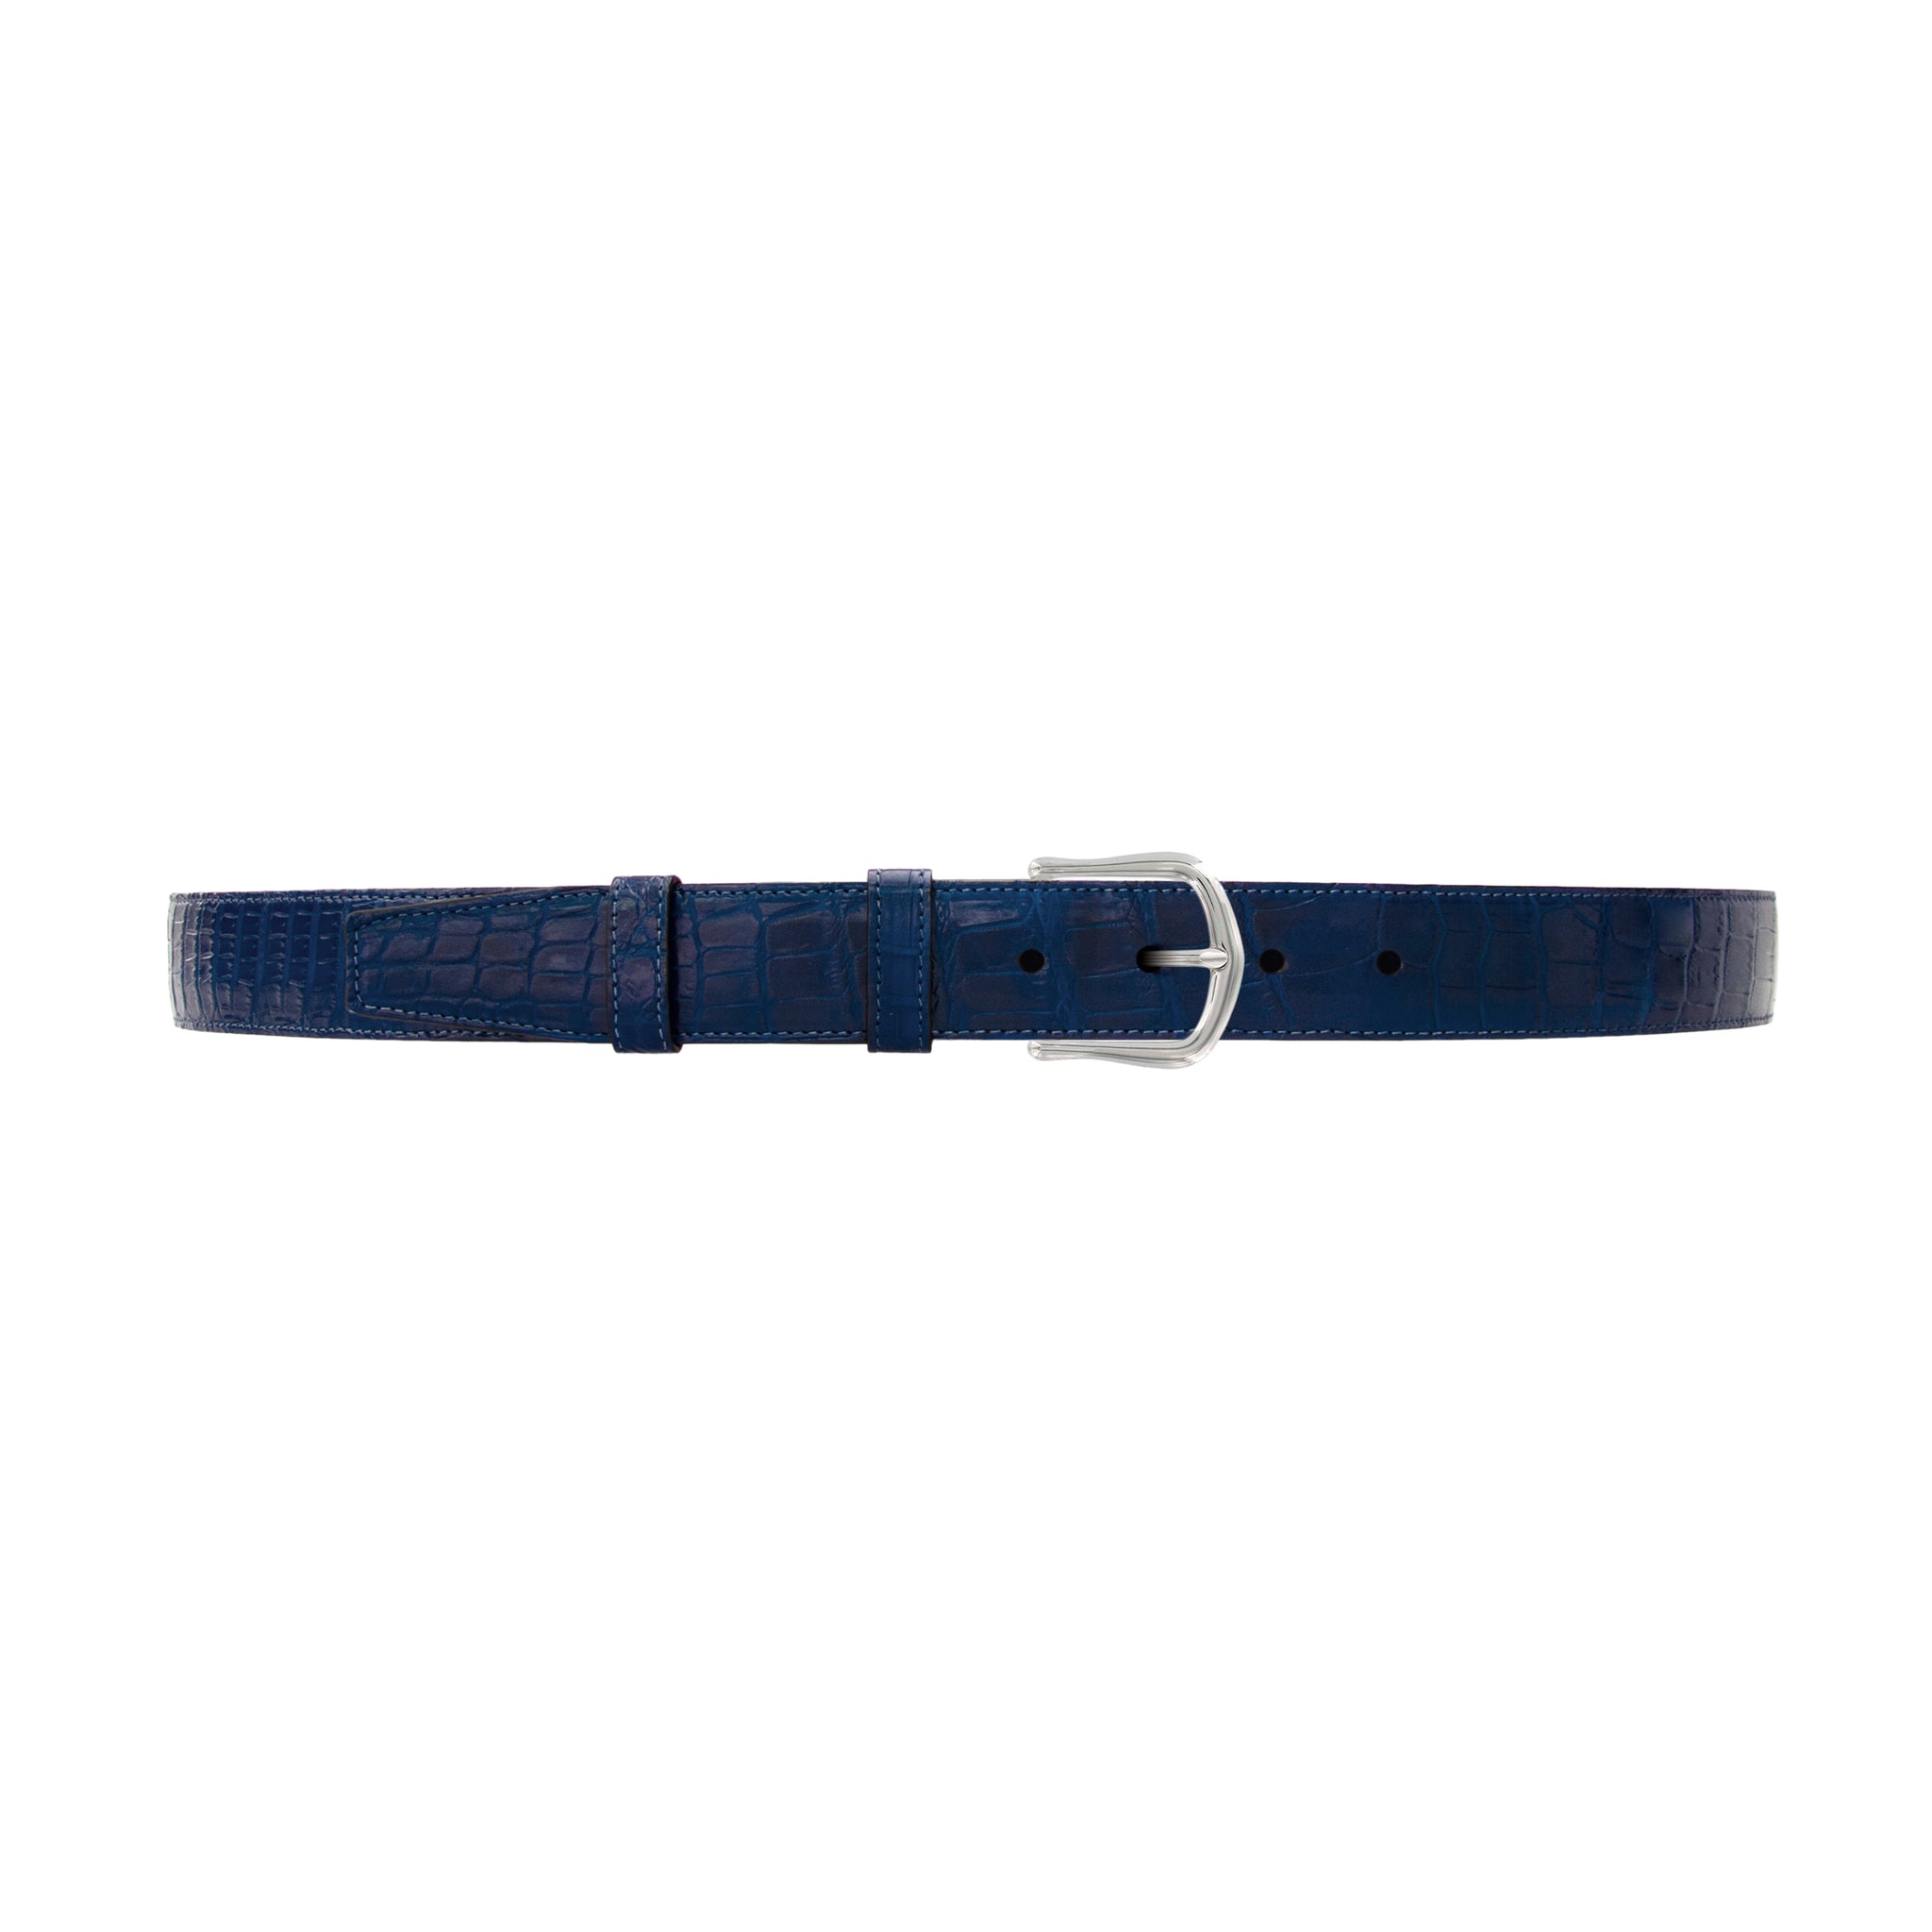 1 1/4" Royal Seasonal Belt with Derby Cocktail Buckle in Polished Nickel